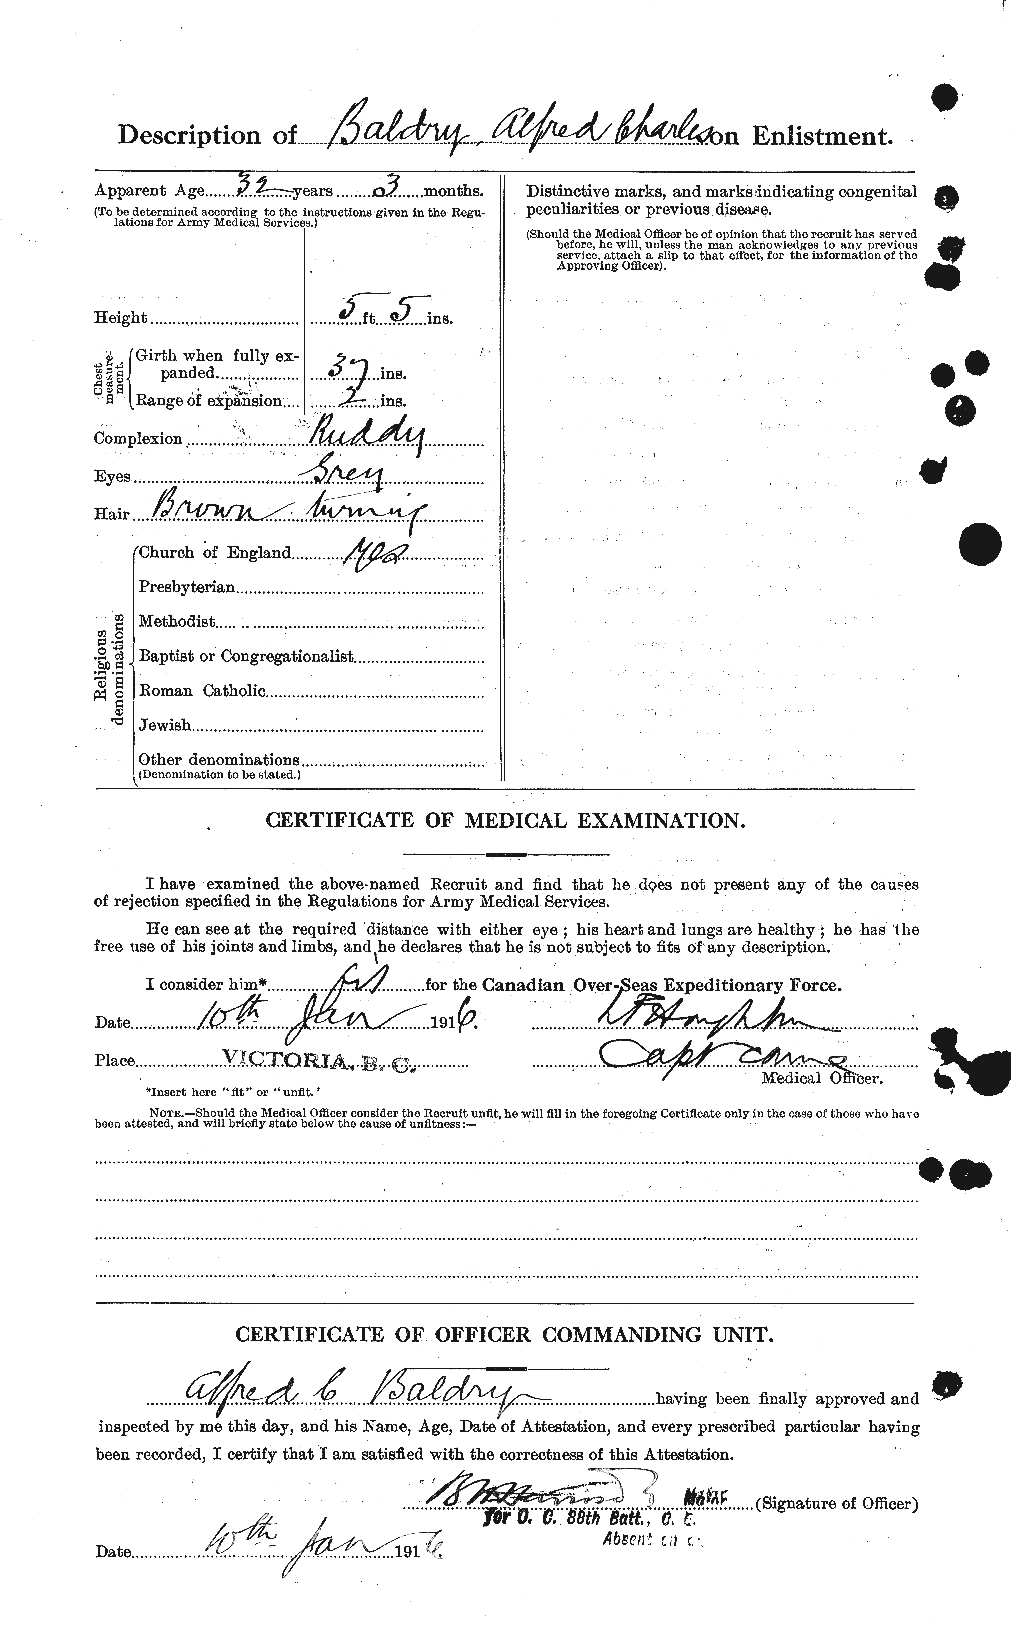 Personnel Records of the First World War - CEF 225361b